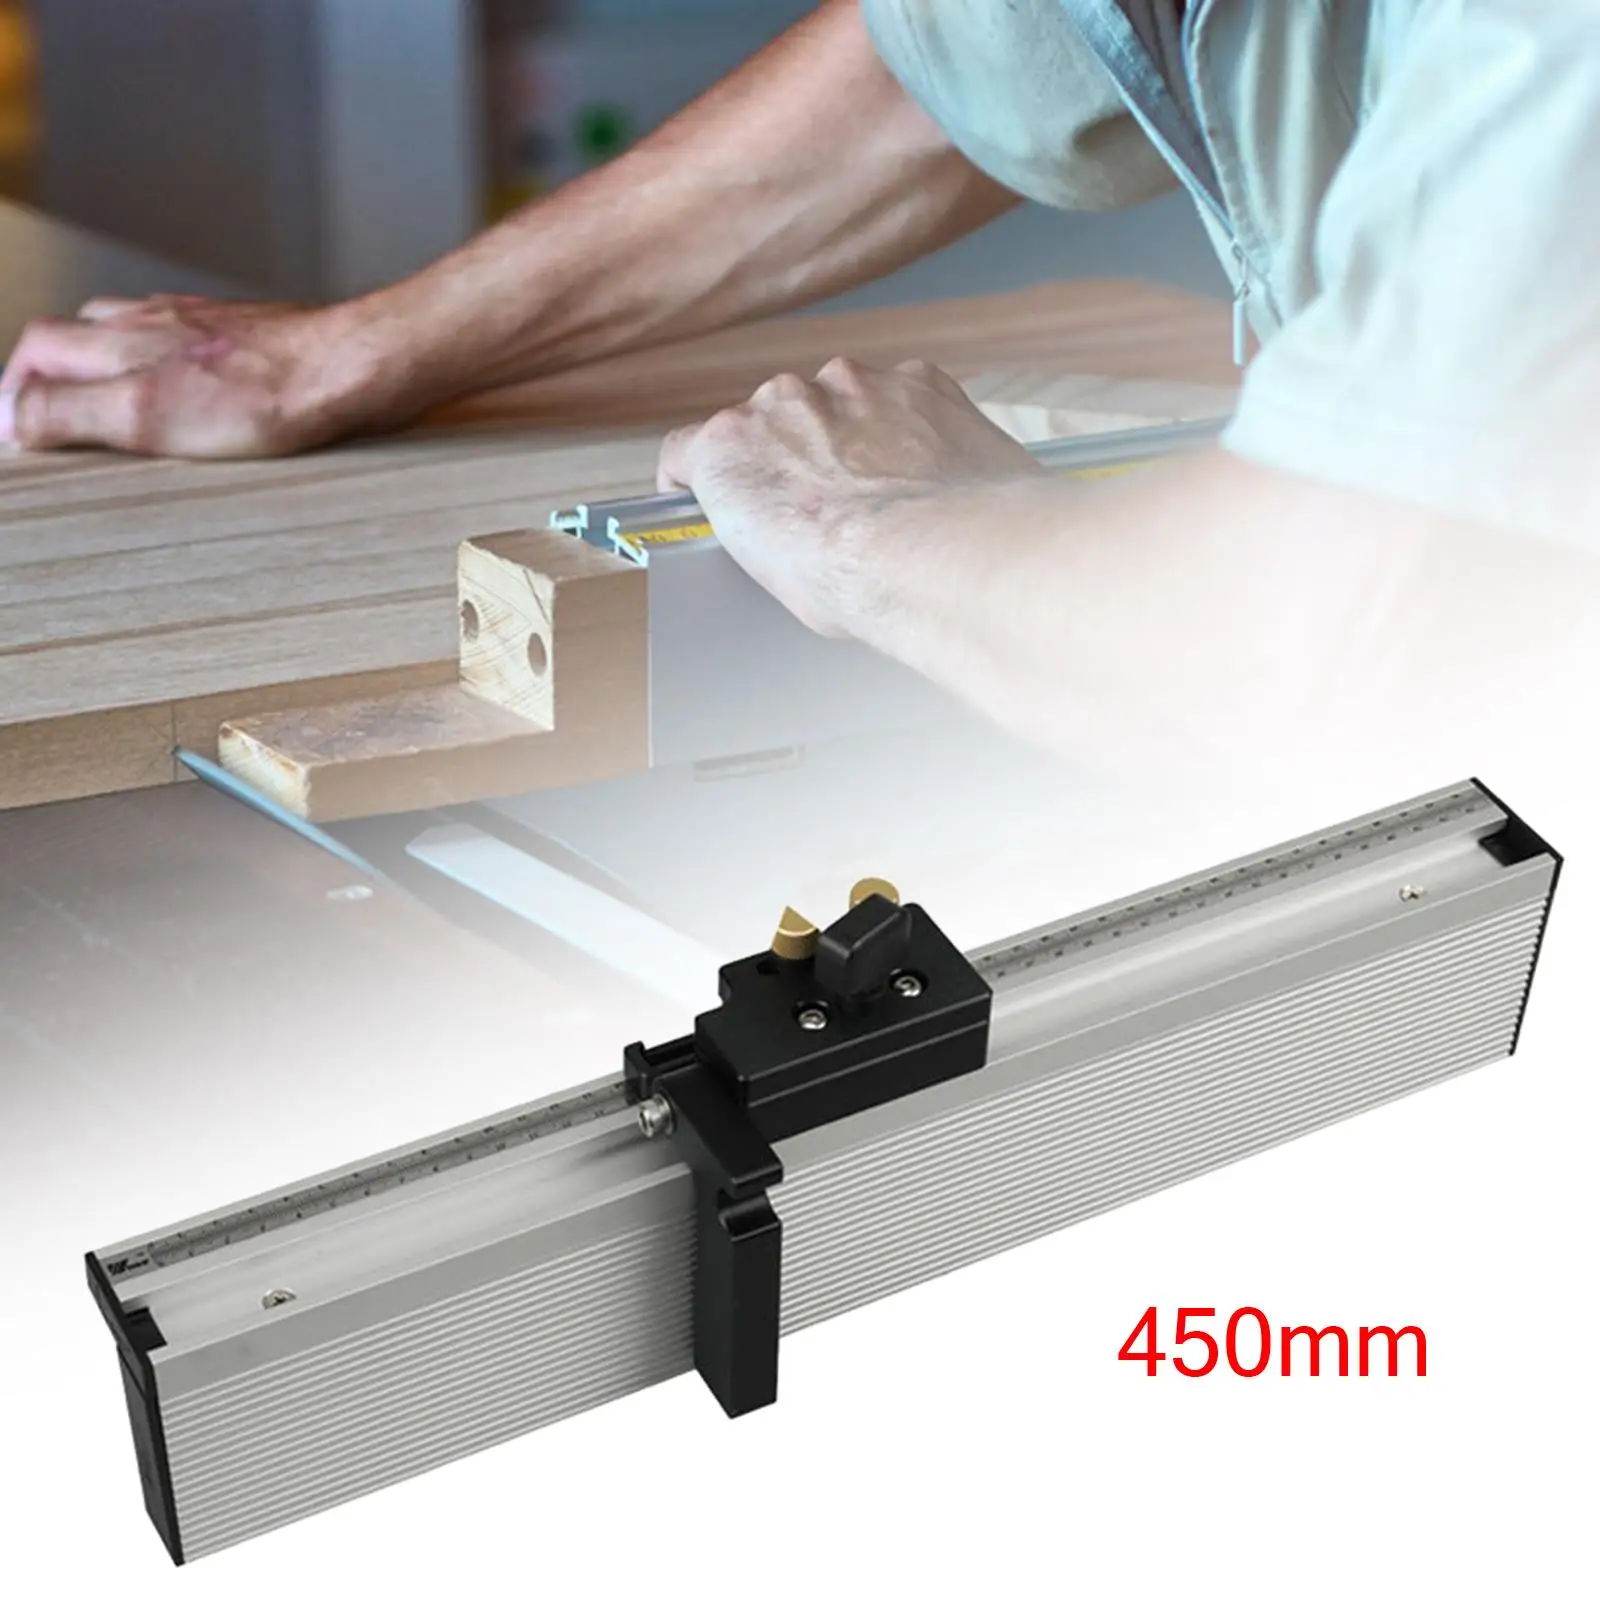 Aluminium Profile Fence Sliding Brackets Table Saw Trimmer Engraving Machine Table Saw Scale Woodworking Tool & Miter Gauge